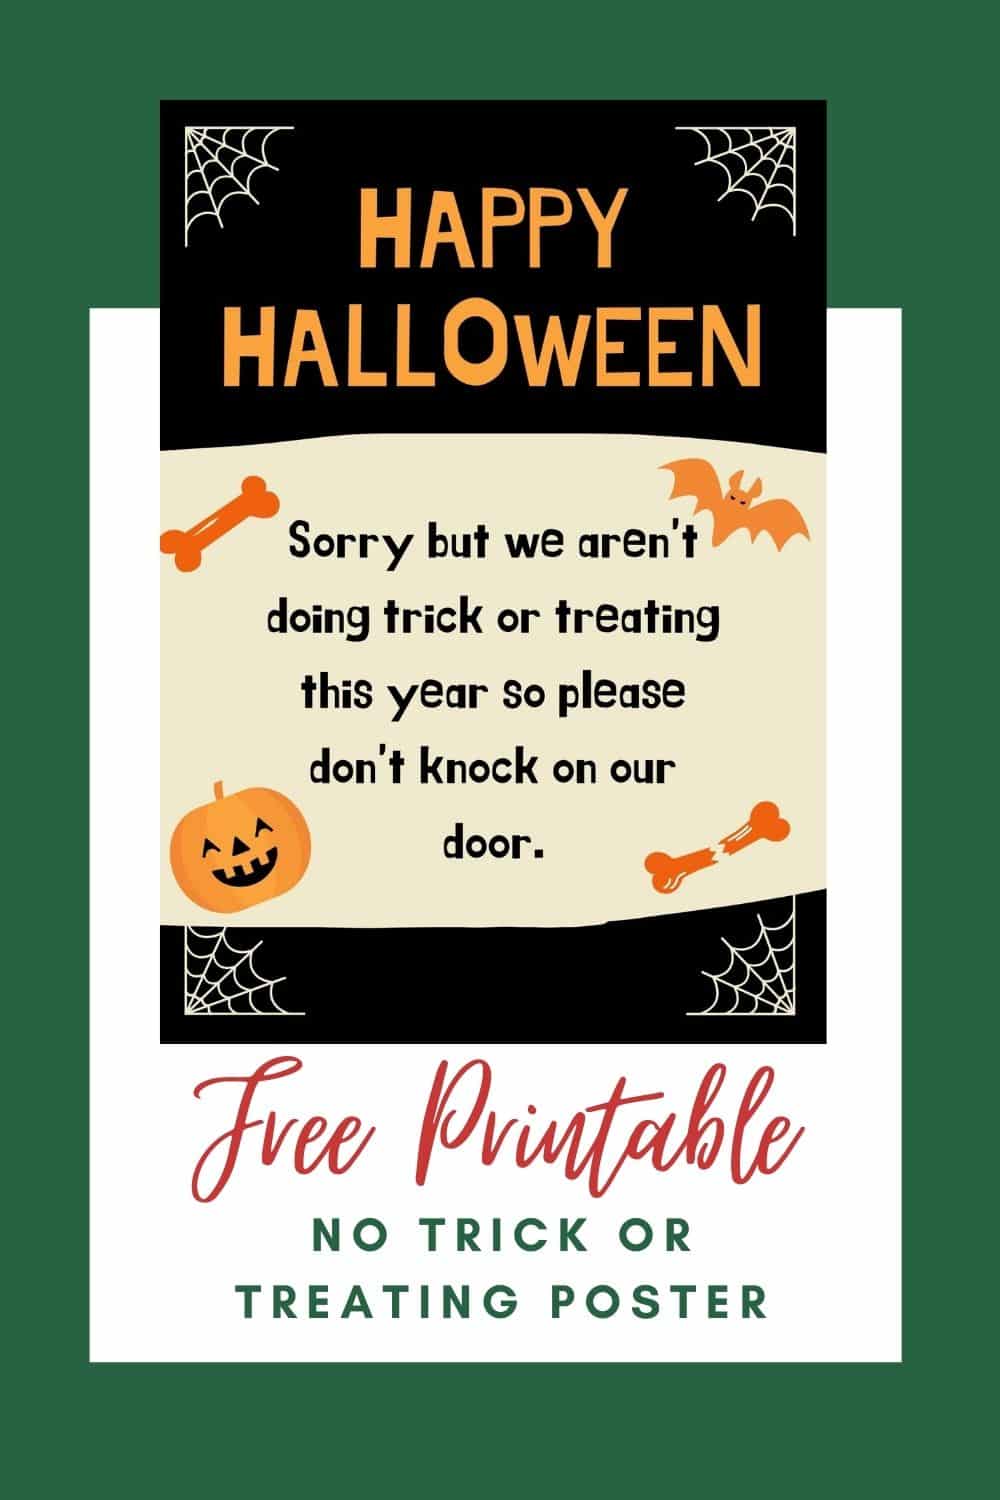 No Trick Or Treating Poster